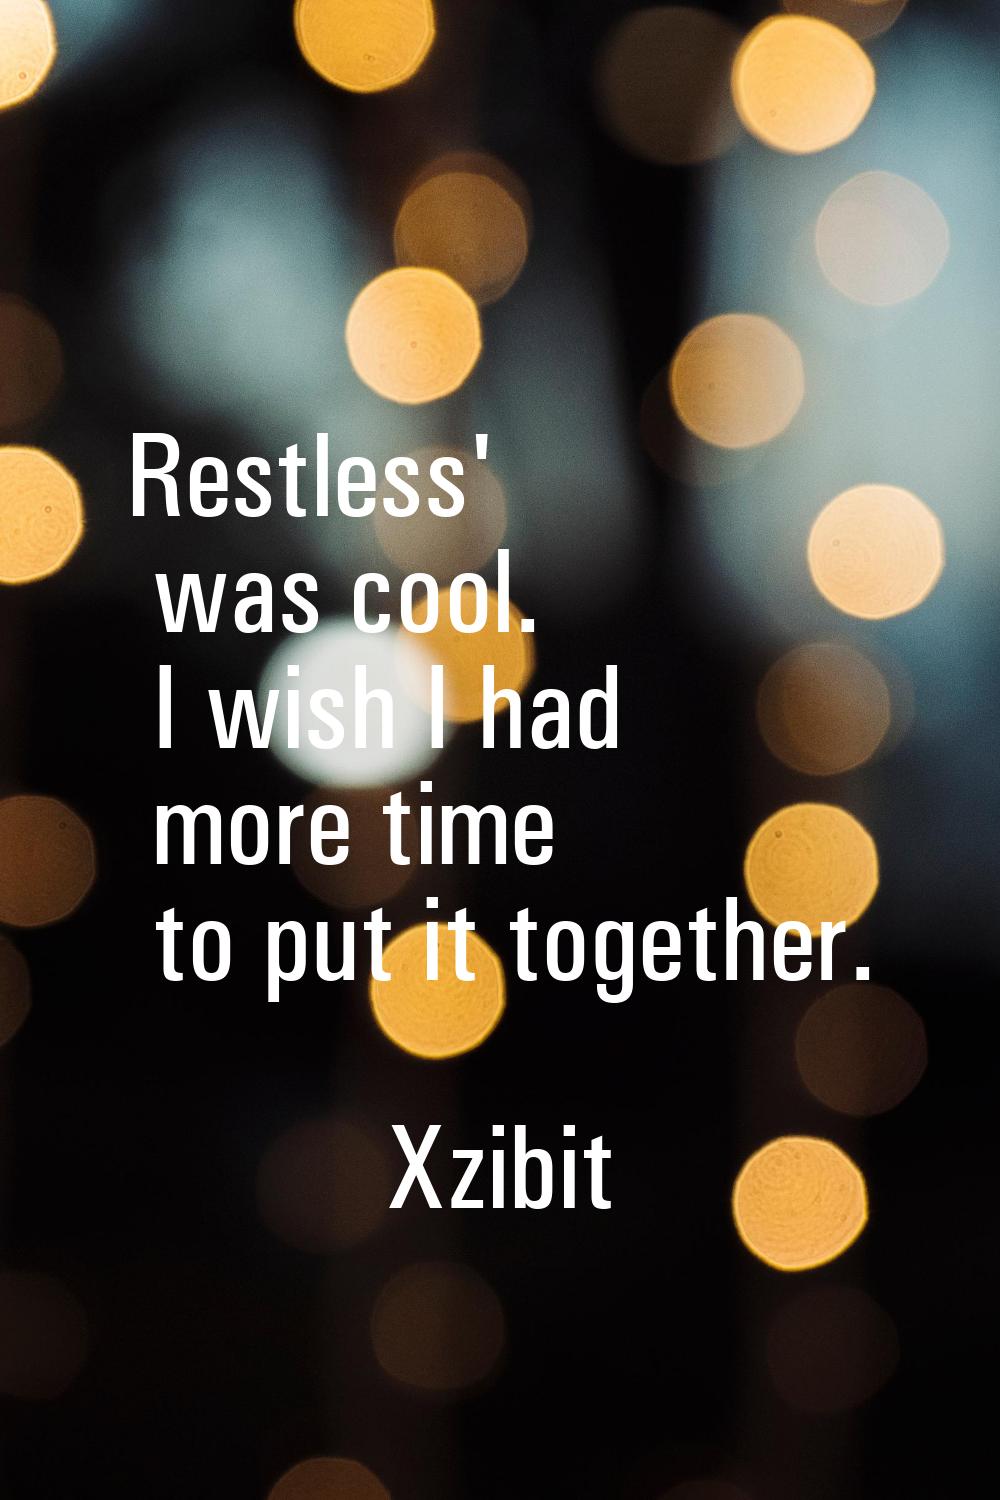 Restless' was cool. I wish I had more time to put it together.